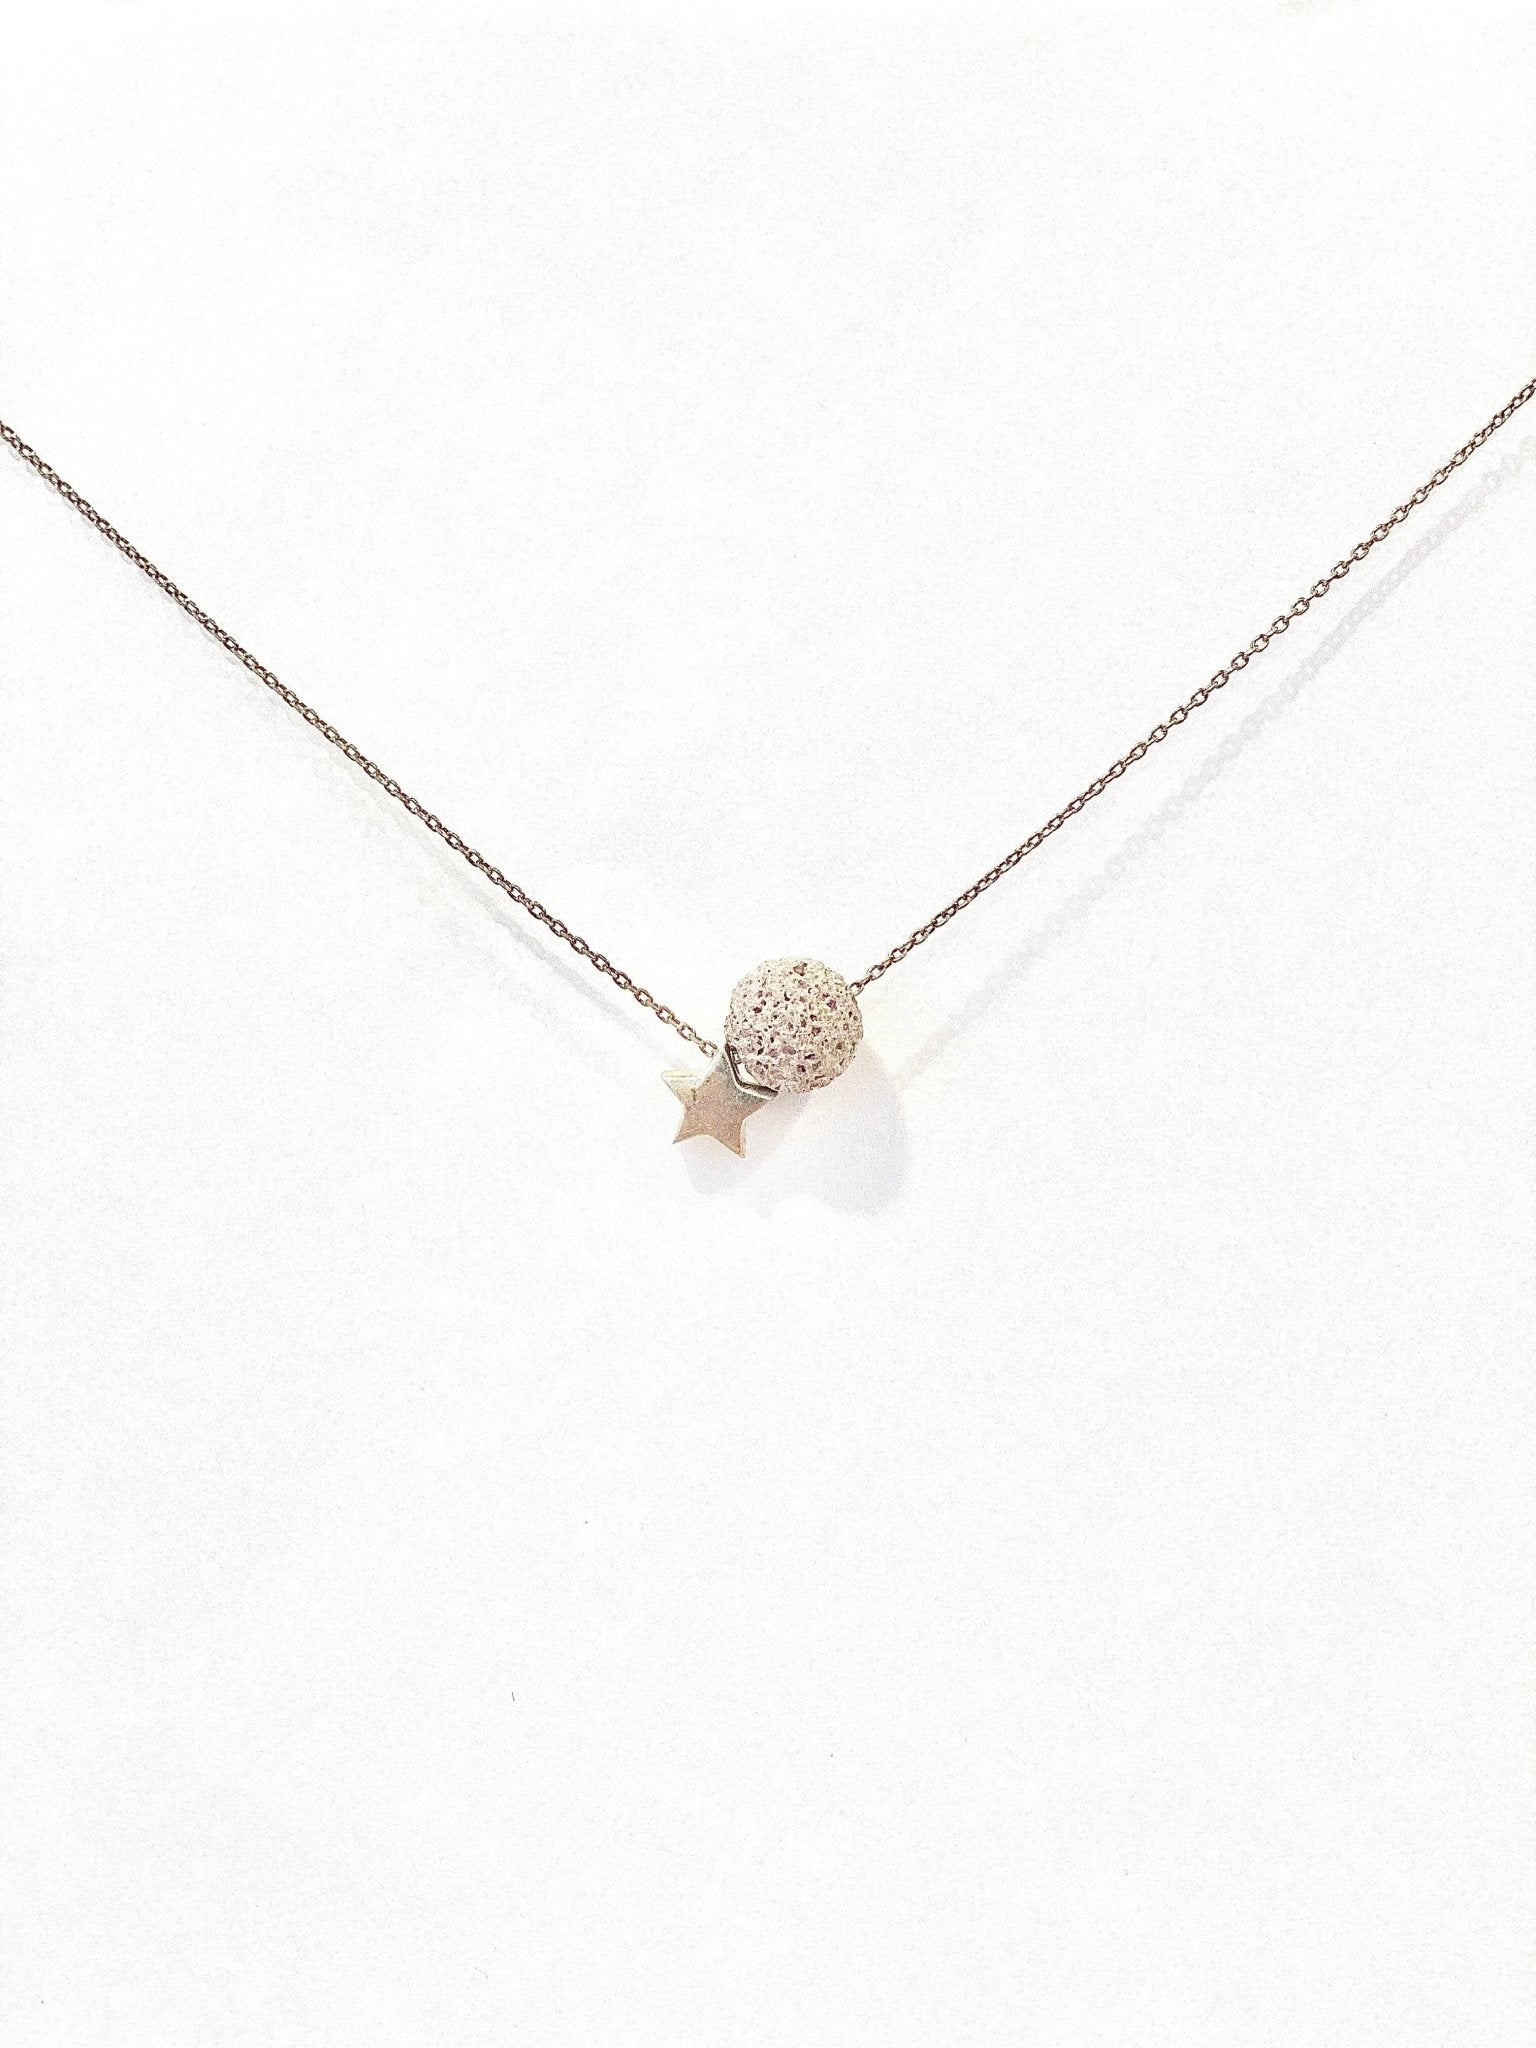 Evelyn Necklace | grey - The Wong Way